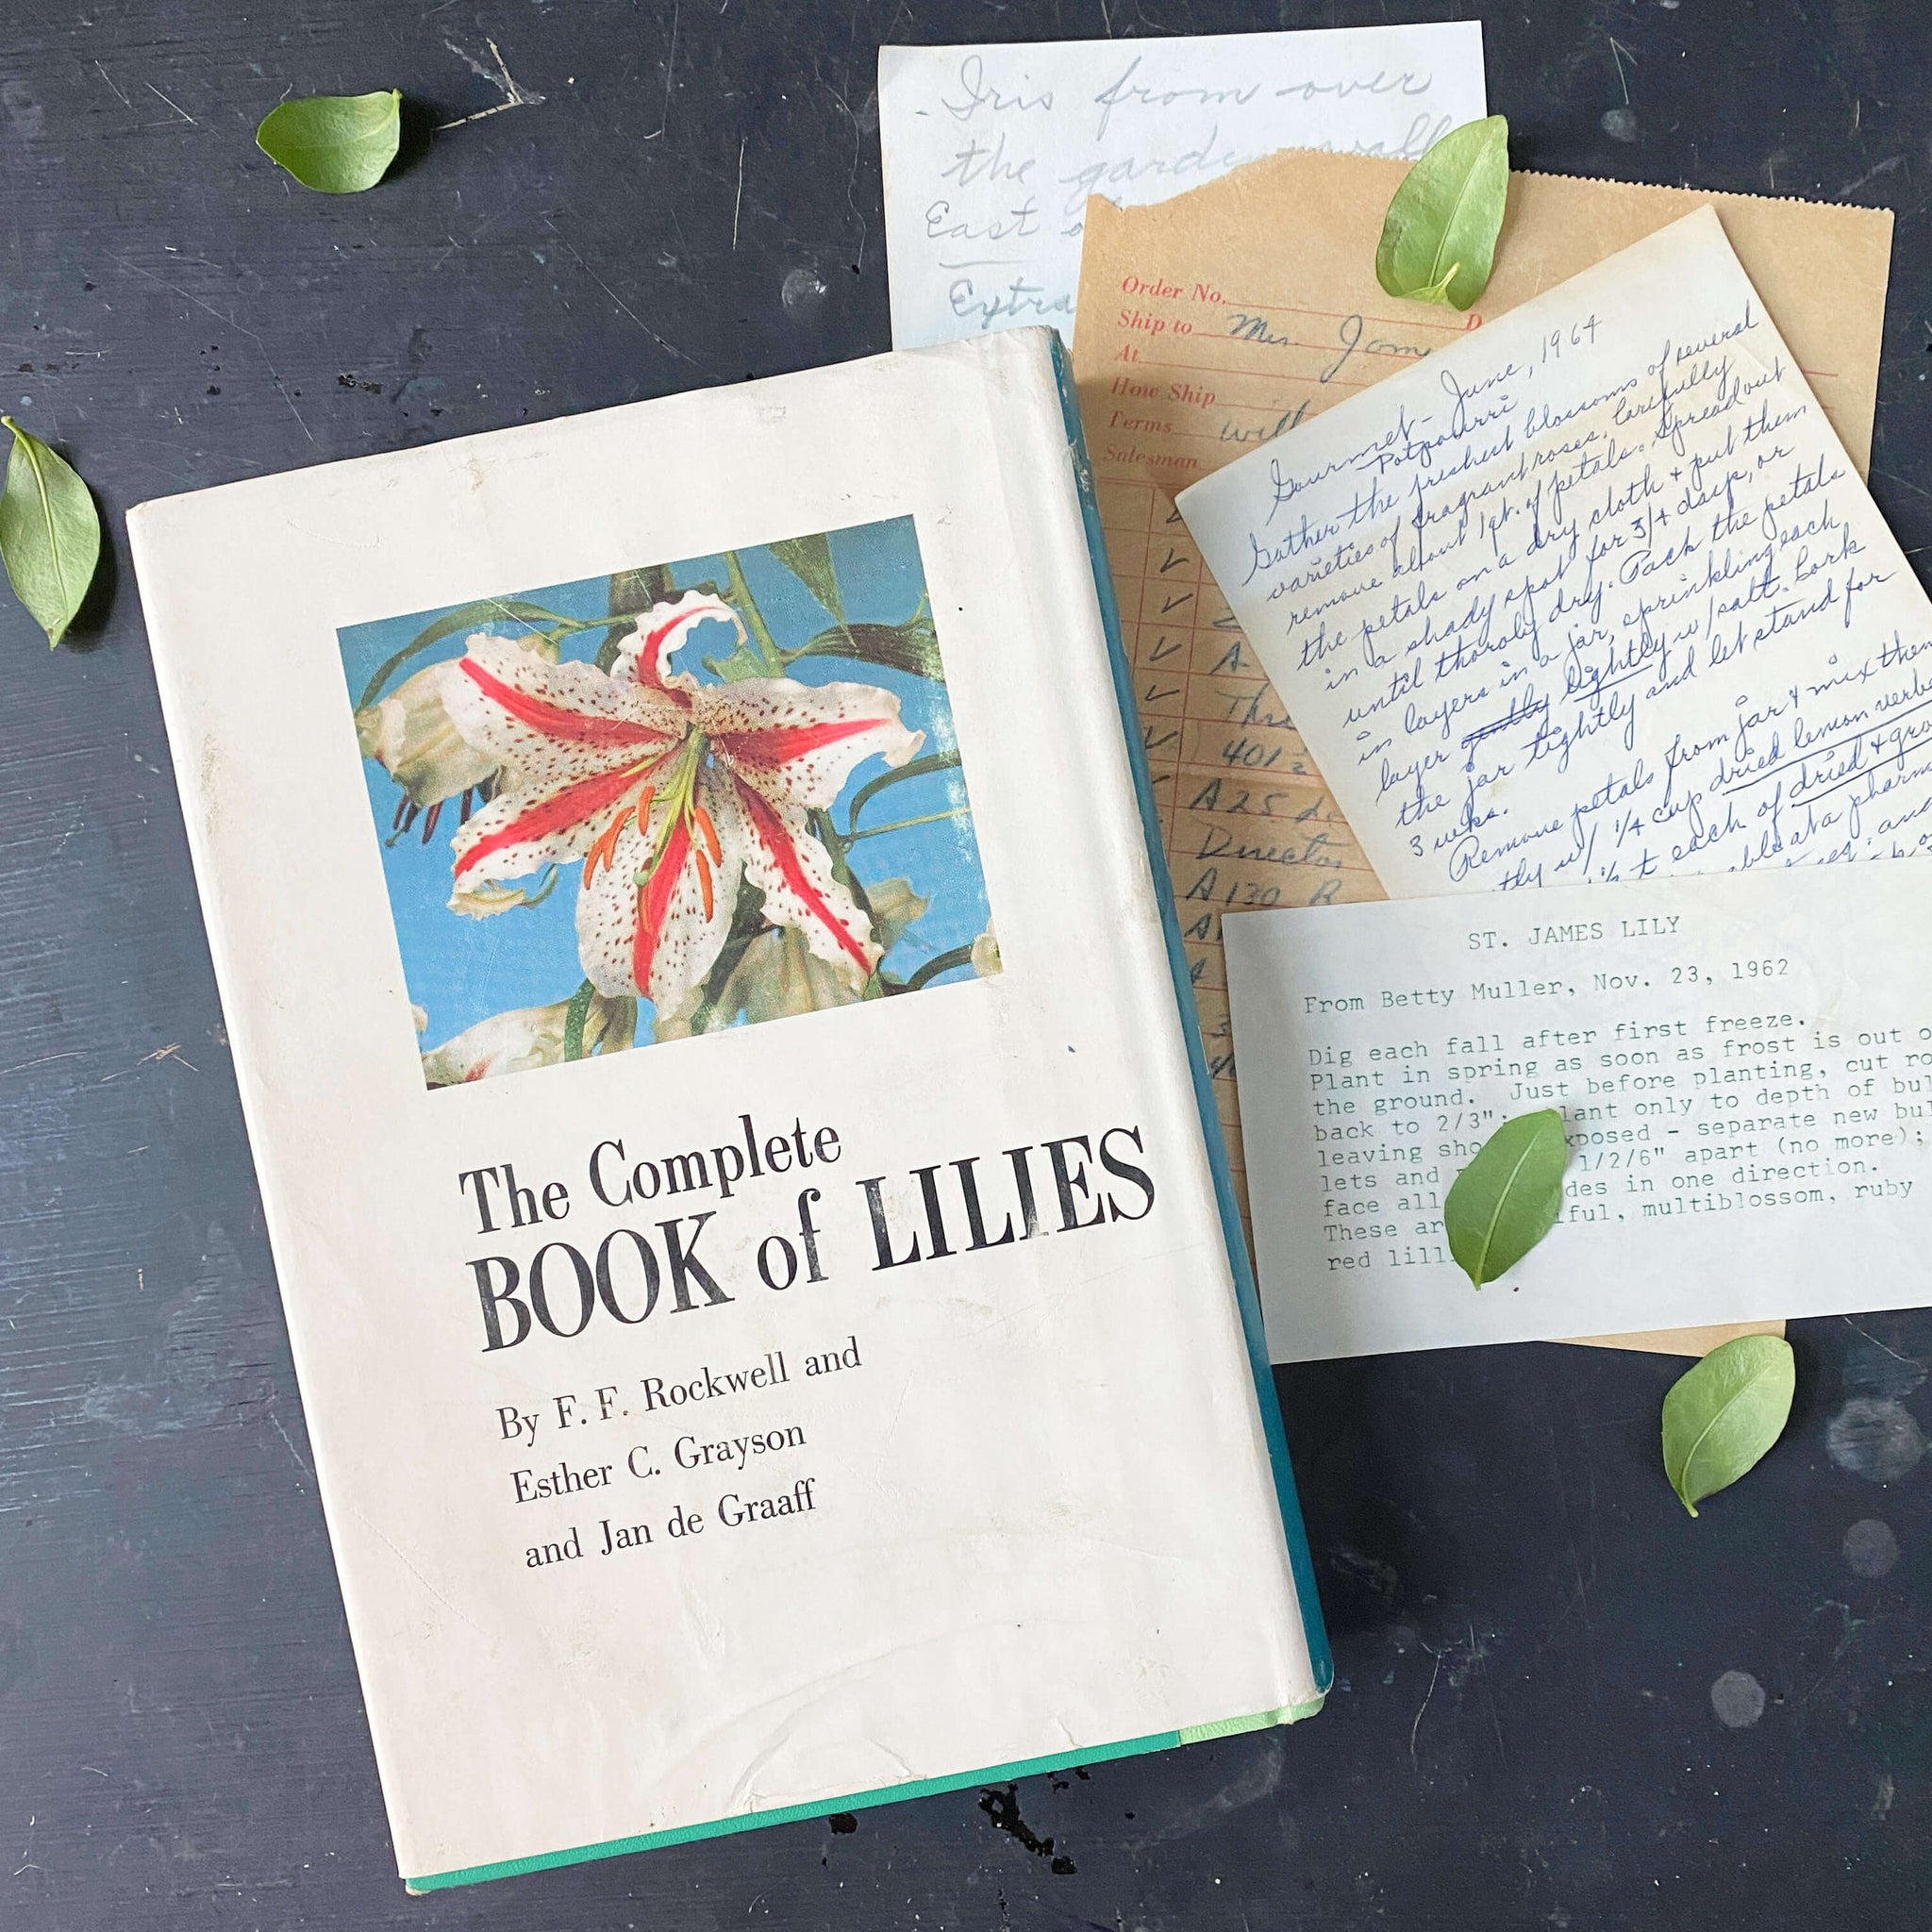 Vintage 1960s Gardening Book - The Complete Book of Lilies by F.F. Rockwell, Esther C. Grayson and Jan deGraff circa 1961